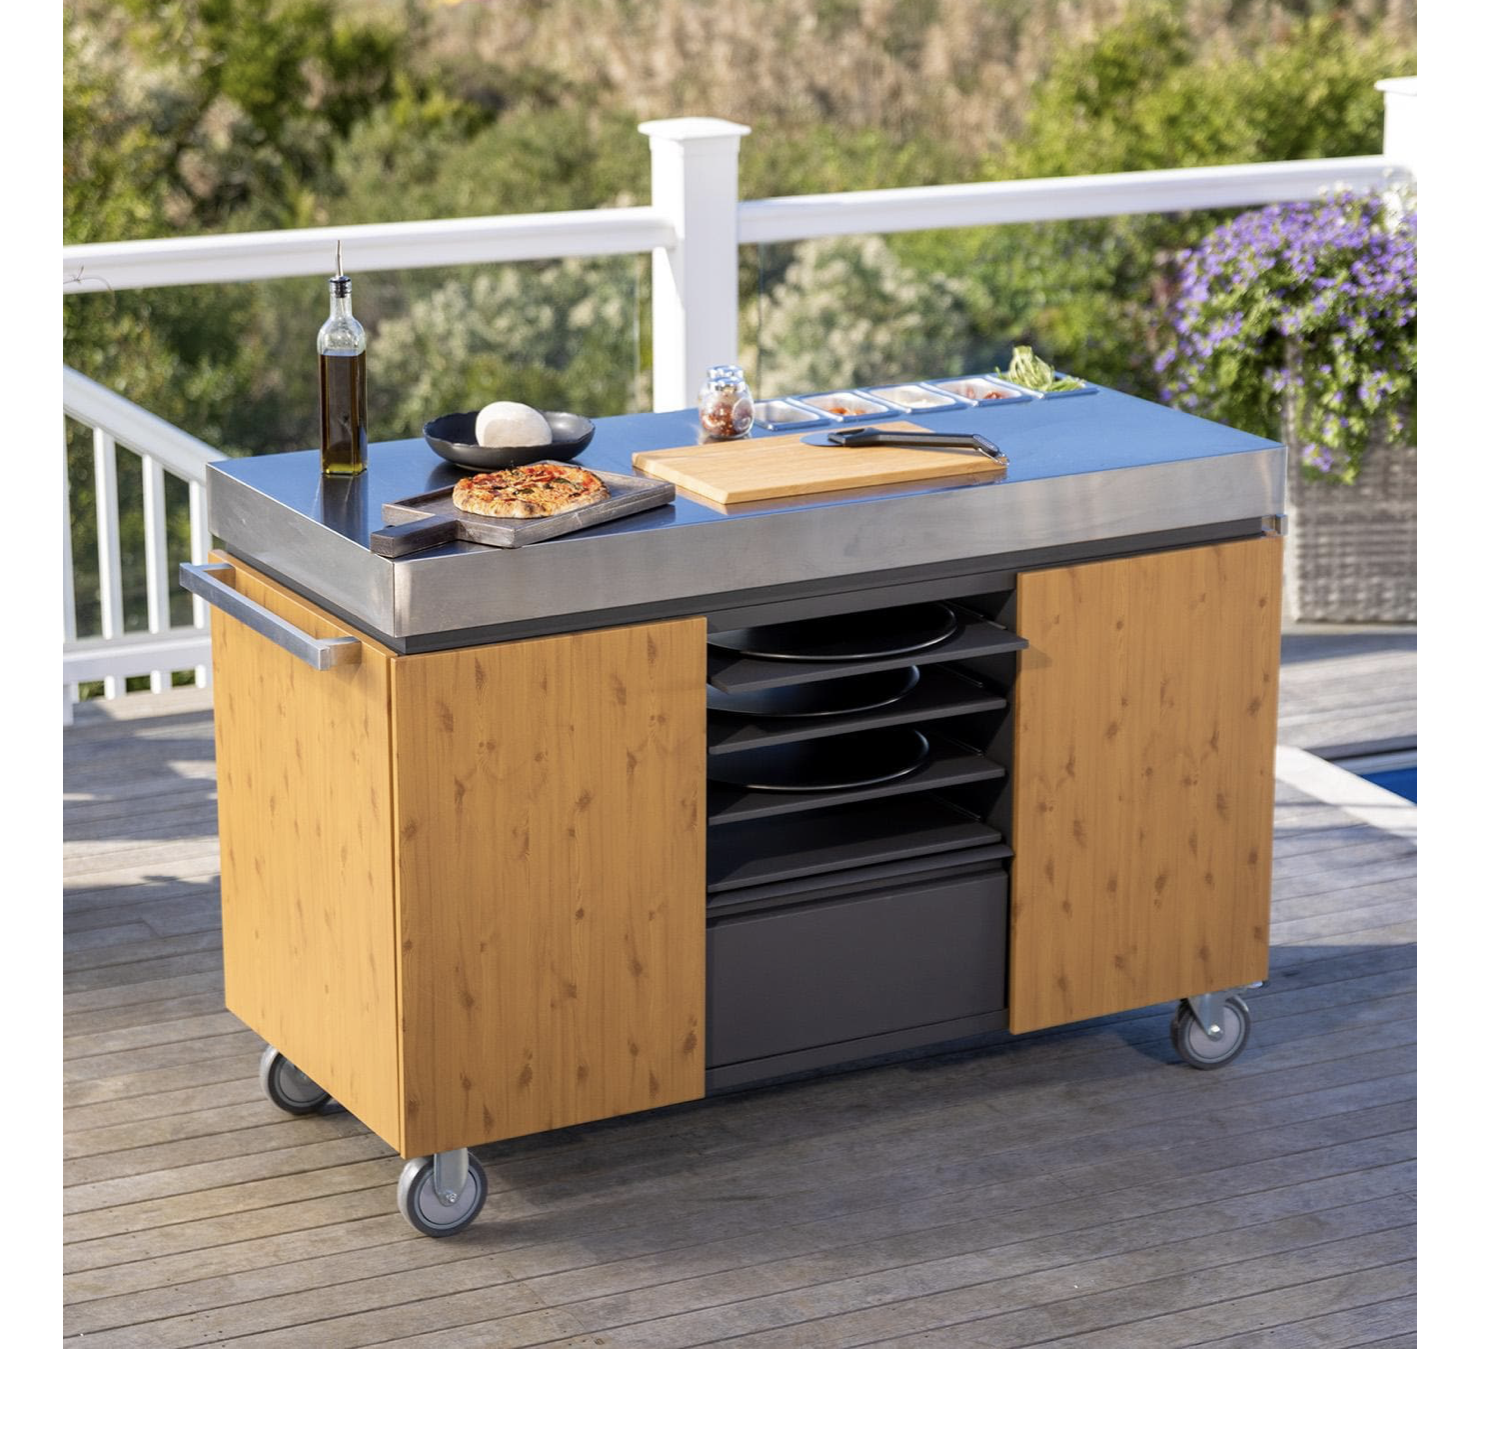 Everdure Pizza Oven Preparation Stand